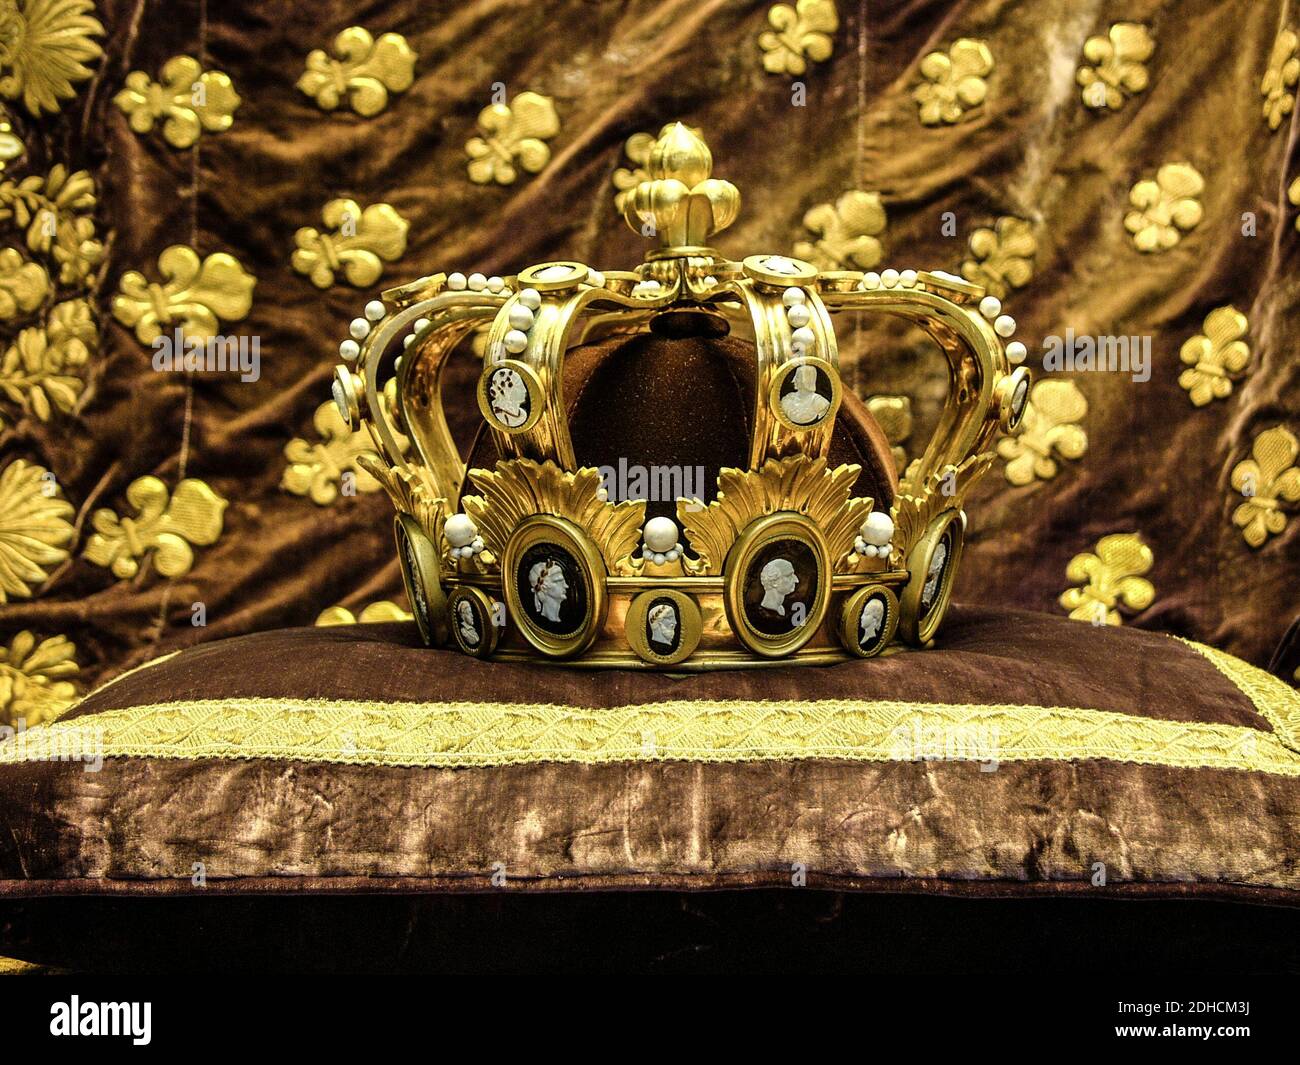 KING CROWN IN ST DENIS ABBEY PARIS - FRENCH HISTORY - ROYALTY - LOUIS PHILIPPE KING OF FRANCE - PARIS HISTORY © F.BEAUMONT Stock Photo